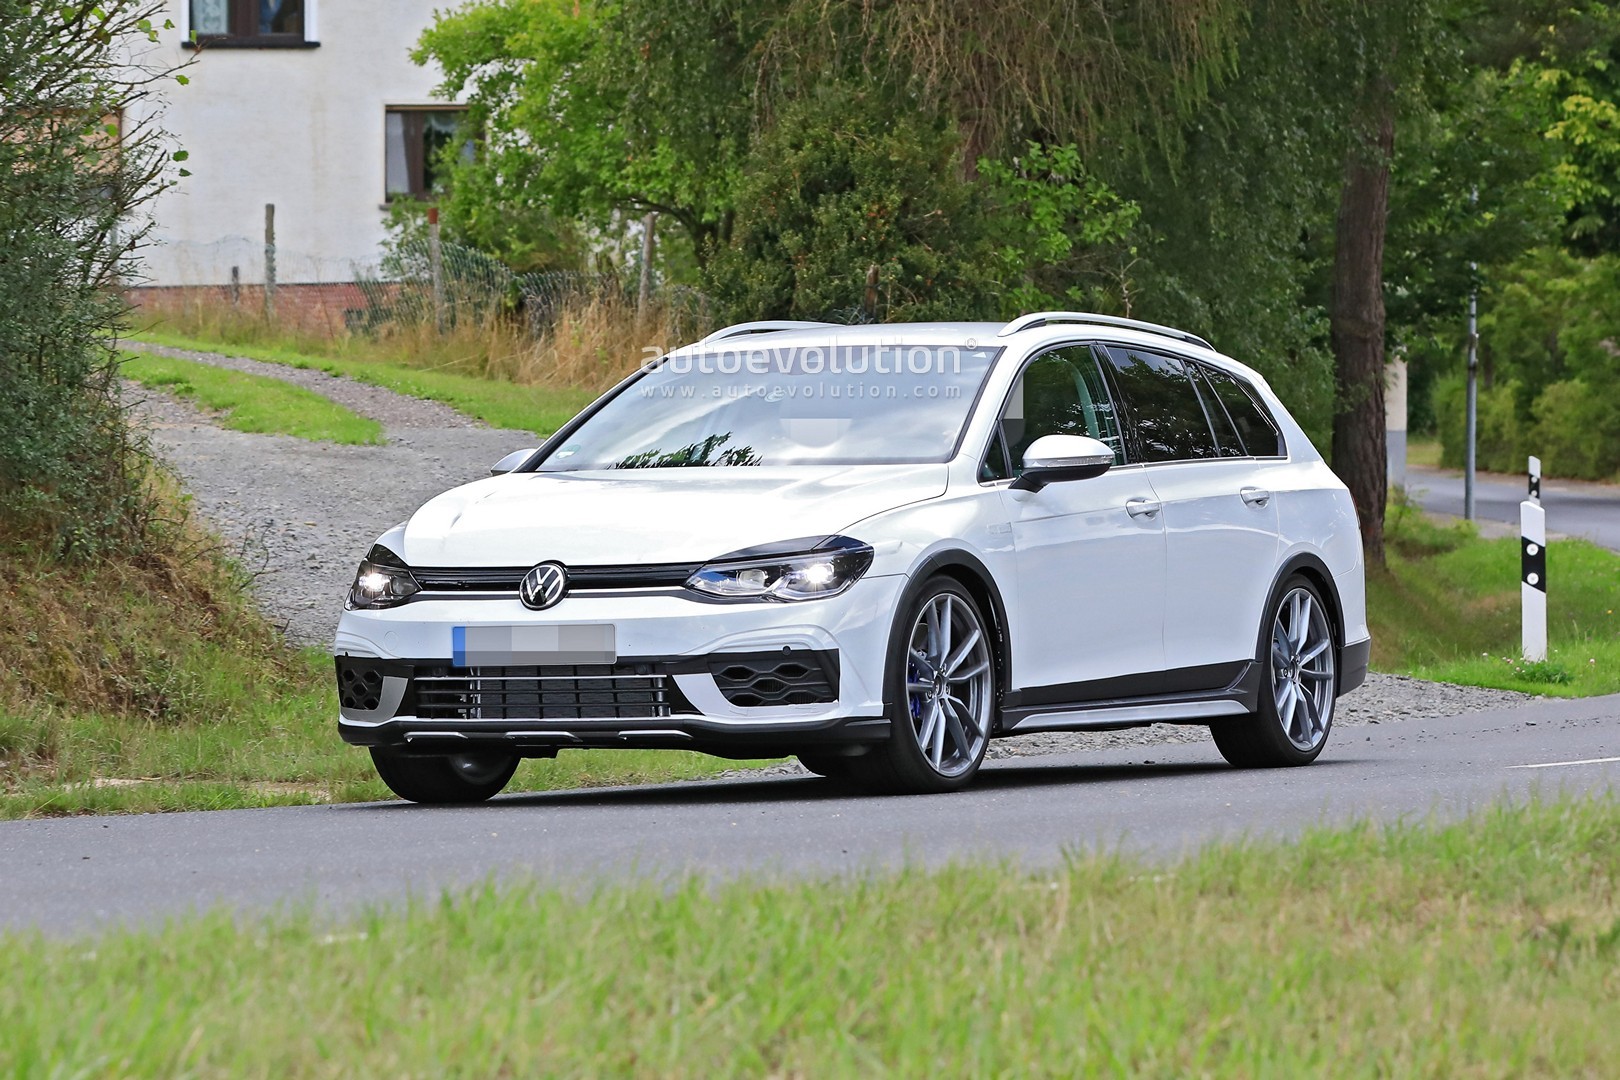 2020 - [Volkswagen] Golf VIII - Page 19 Volkswagen-making-a-golf-r-wagon-with-audi-s4-power-that-looks-line-an-alltrack_18